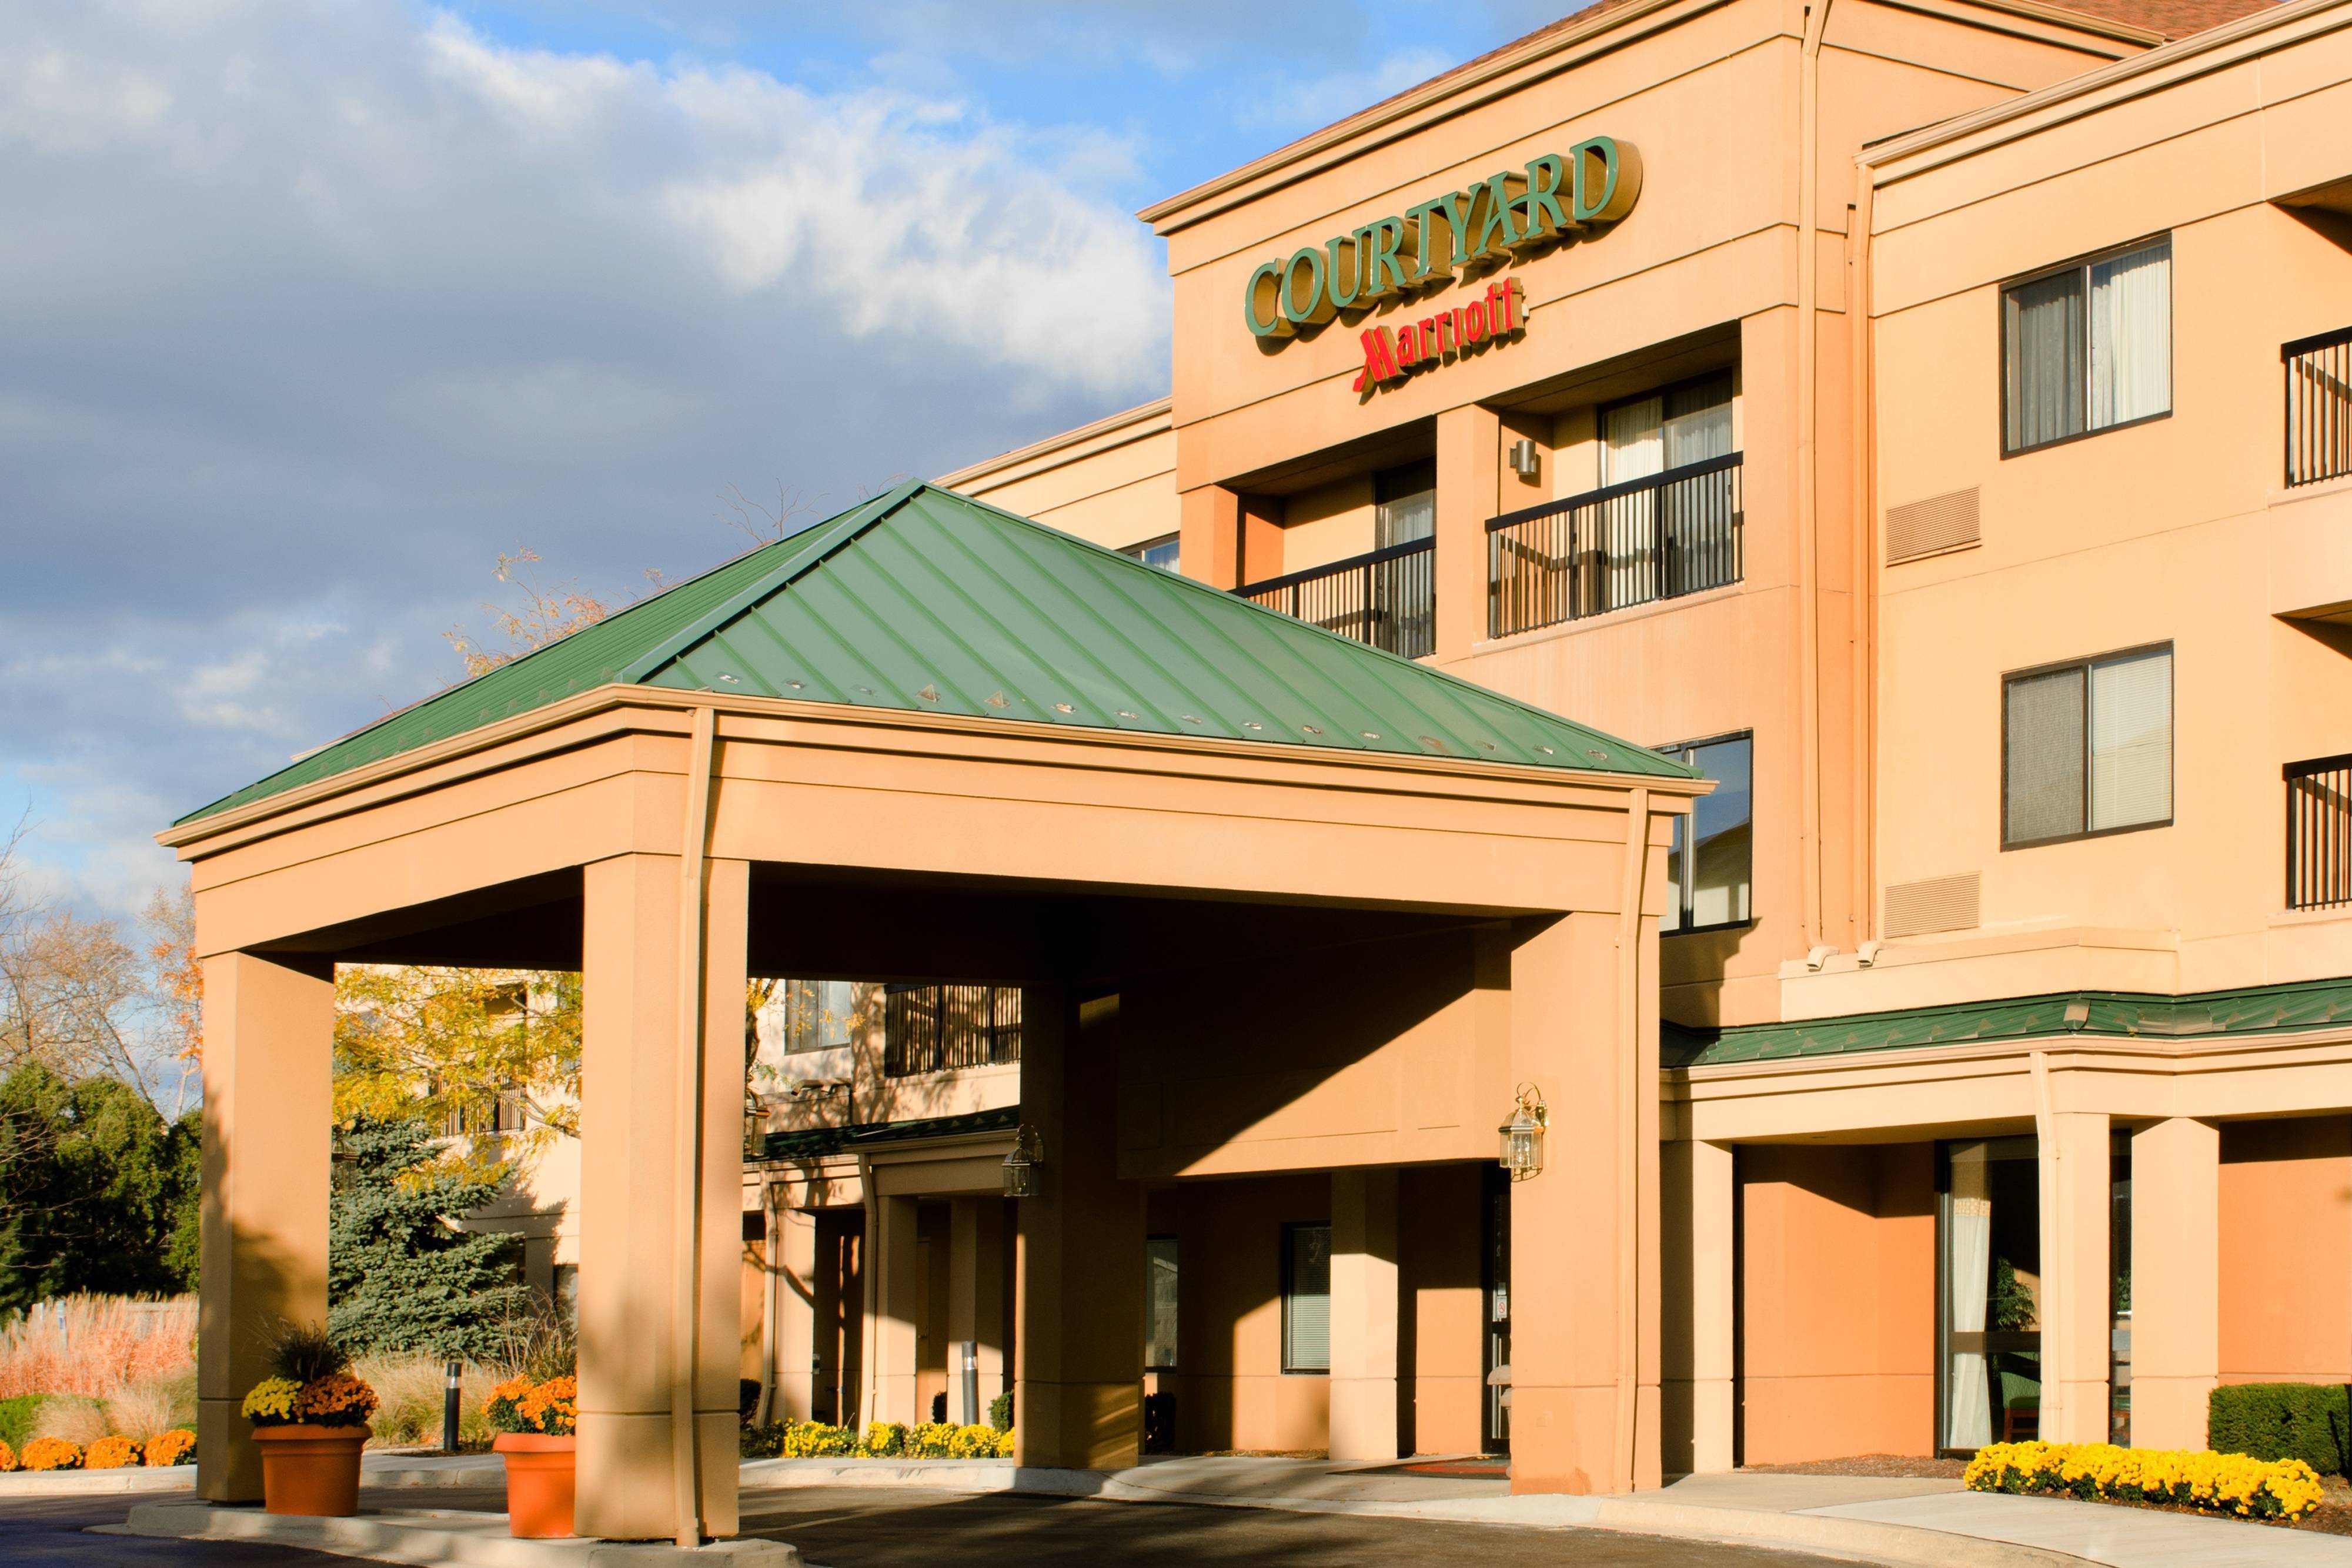 Photo of Courtyard by Marriott Chicago Elgin/West Dundee, West Dundee, IL